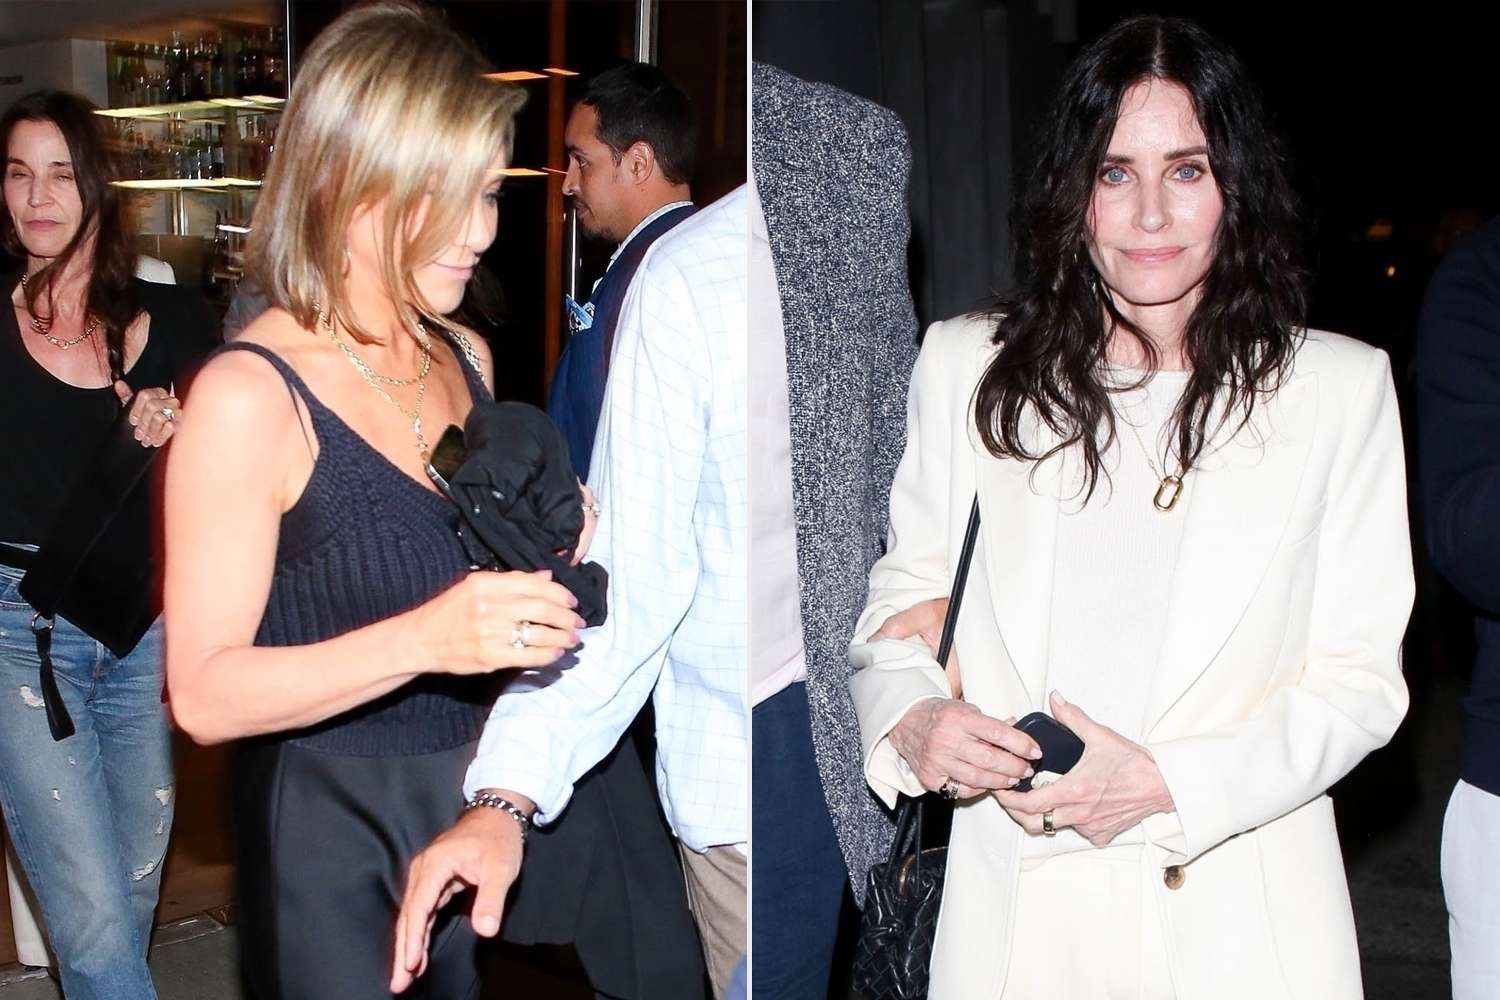 'Friends' Forever! Jennifer Aniston and Courteney Cox Spend Dinner with Pals in L.A.